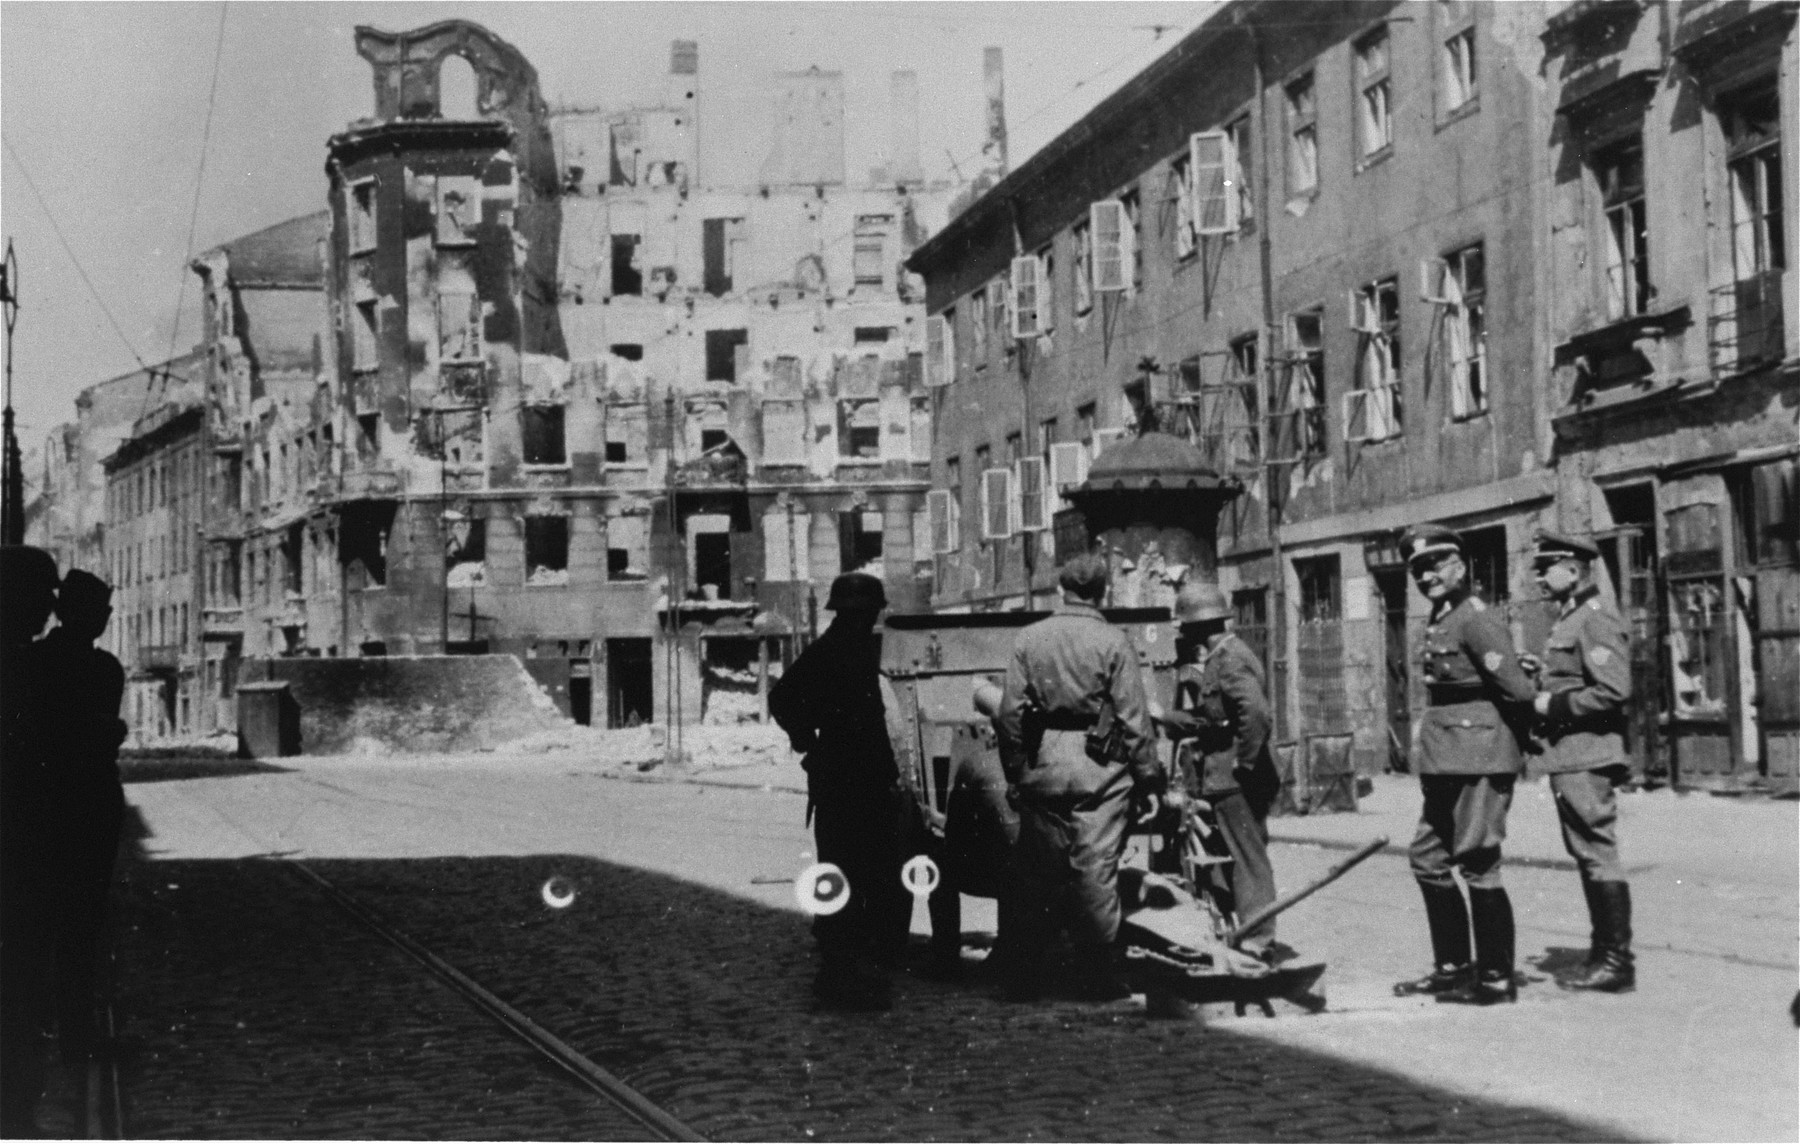 A German gun crew prepares to shell the ruins of a building during the suppression of the Warsaw ghetto uprising.